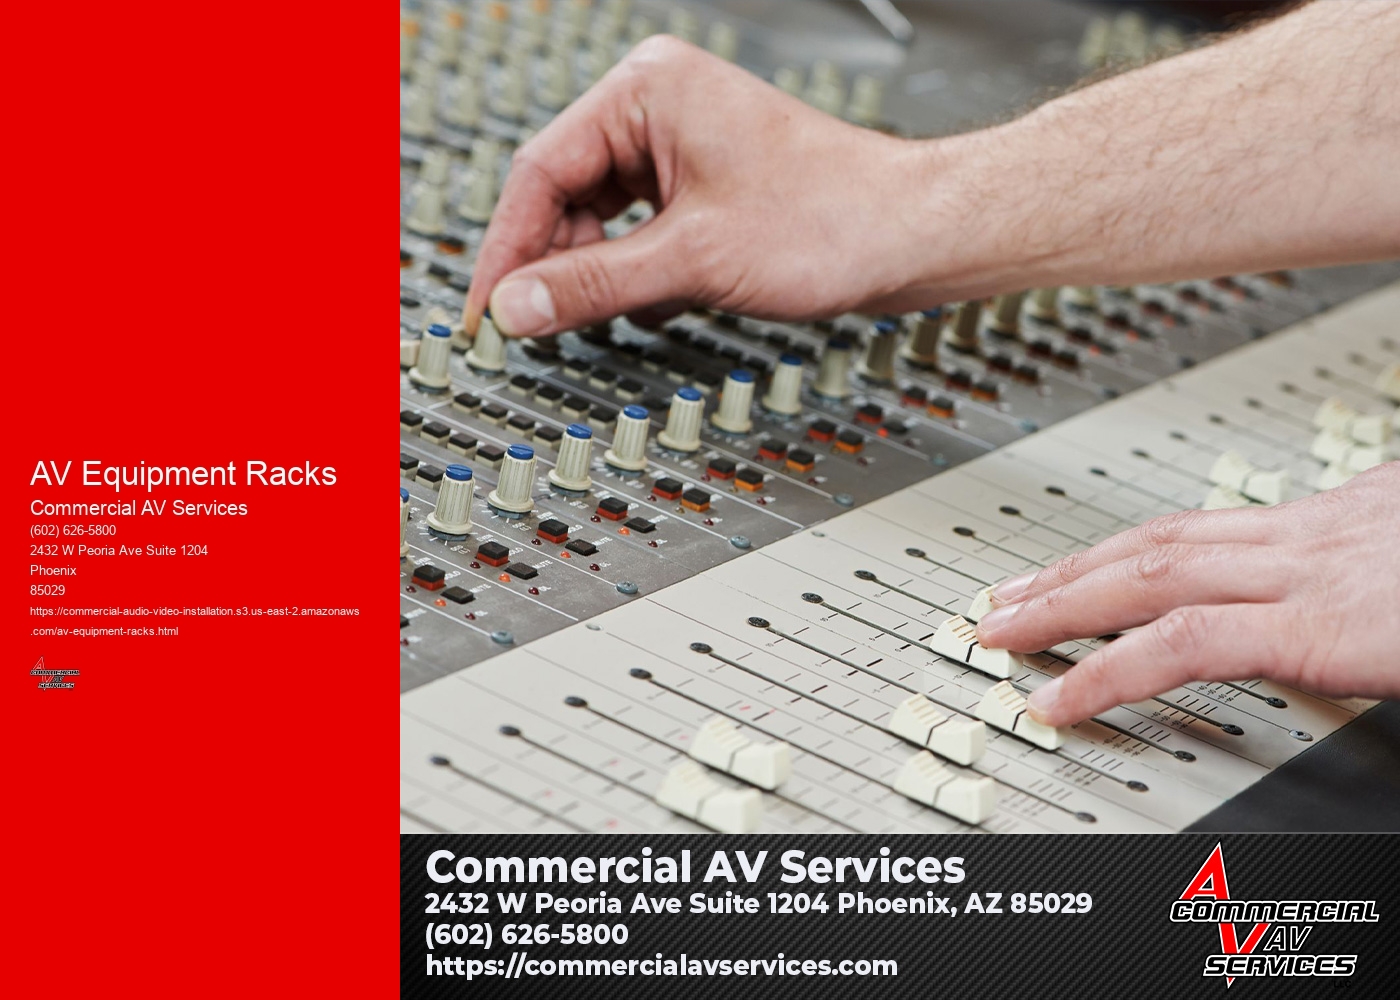 What factors should be considered when selecting an AV equipment rack for a specific application?